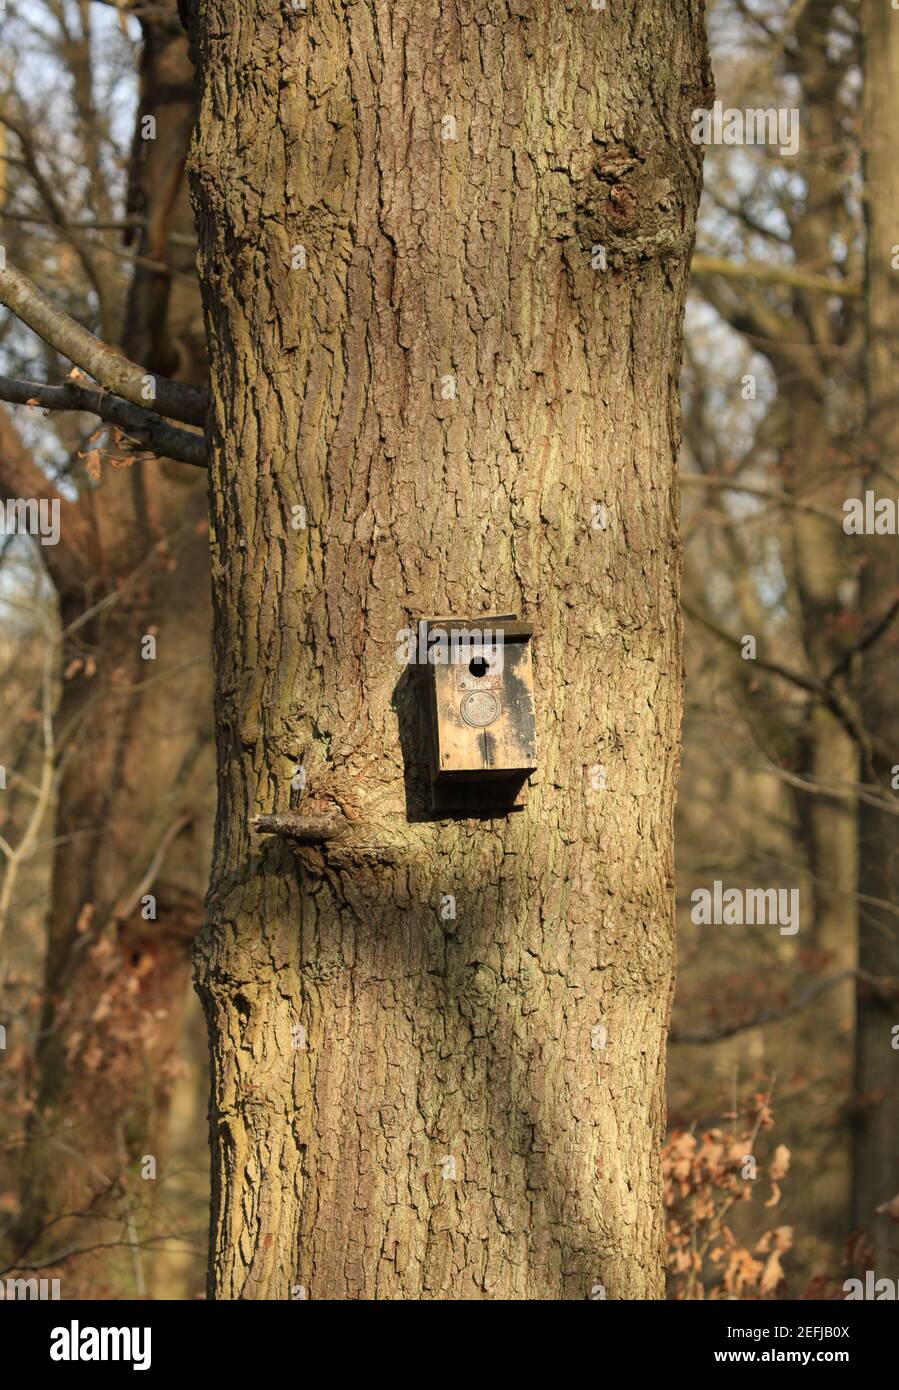 Bird nesting box mounted on a tree in the Wyre forest, Worcestershire, England, UK. Stock Photo